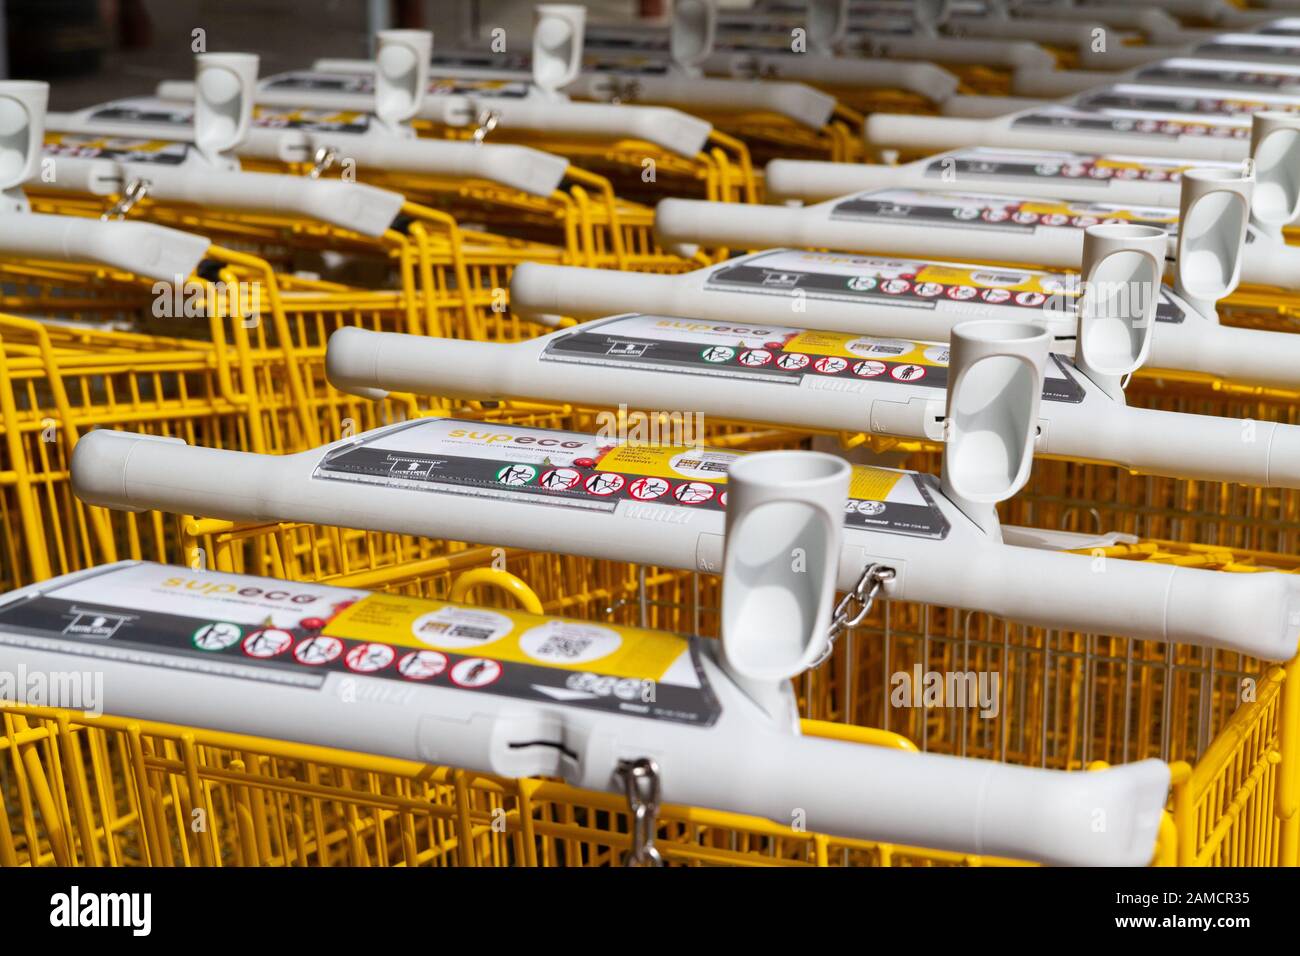 Rows of yellow branded shopping trolleys (carts) at a supermarket in France. Stock Photo